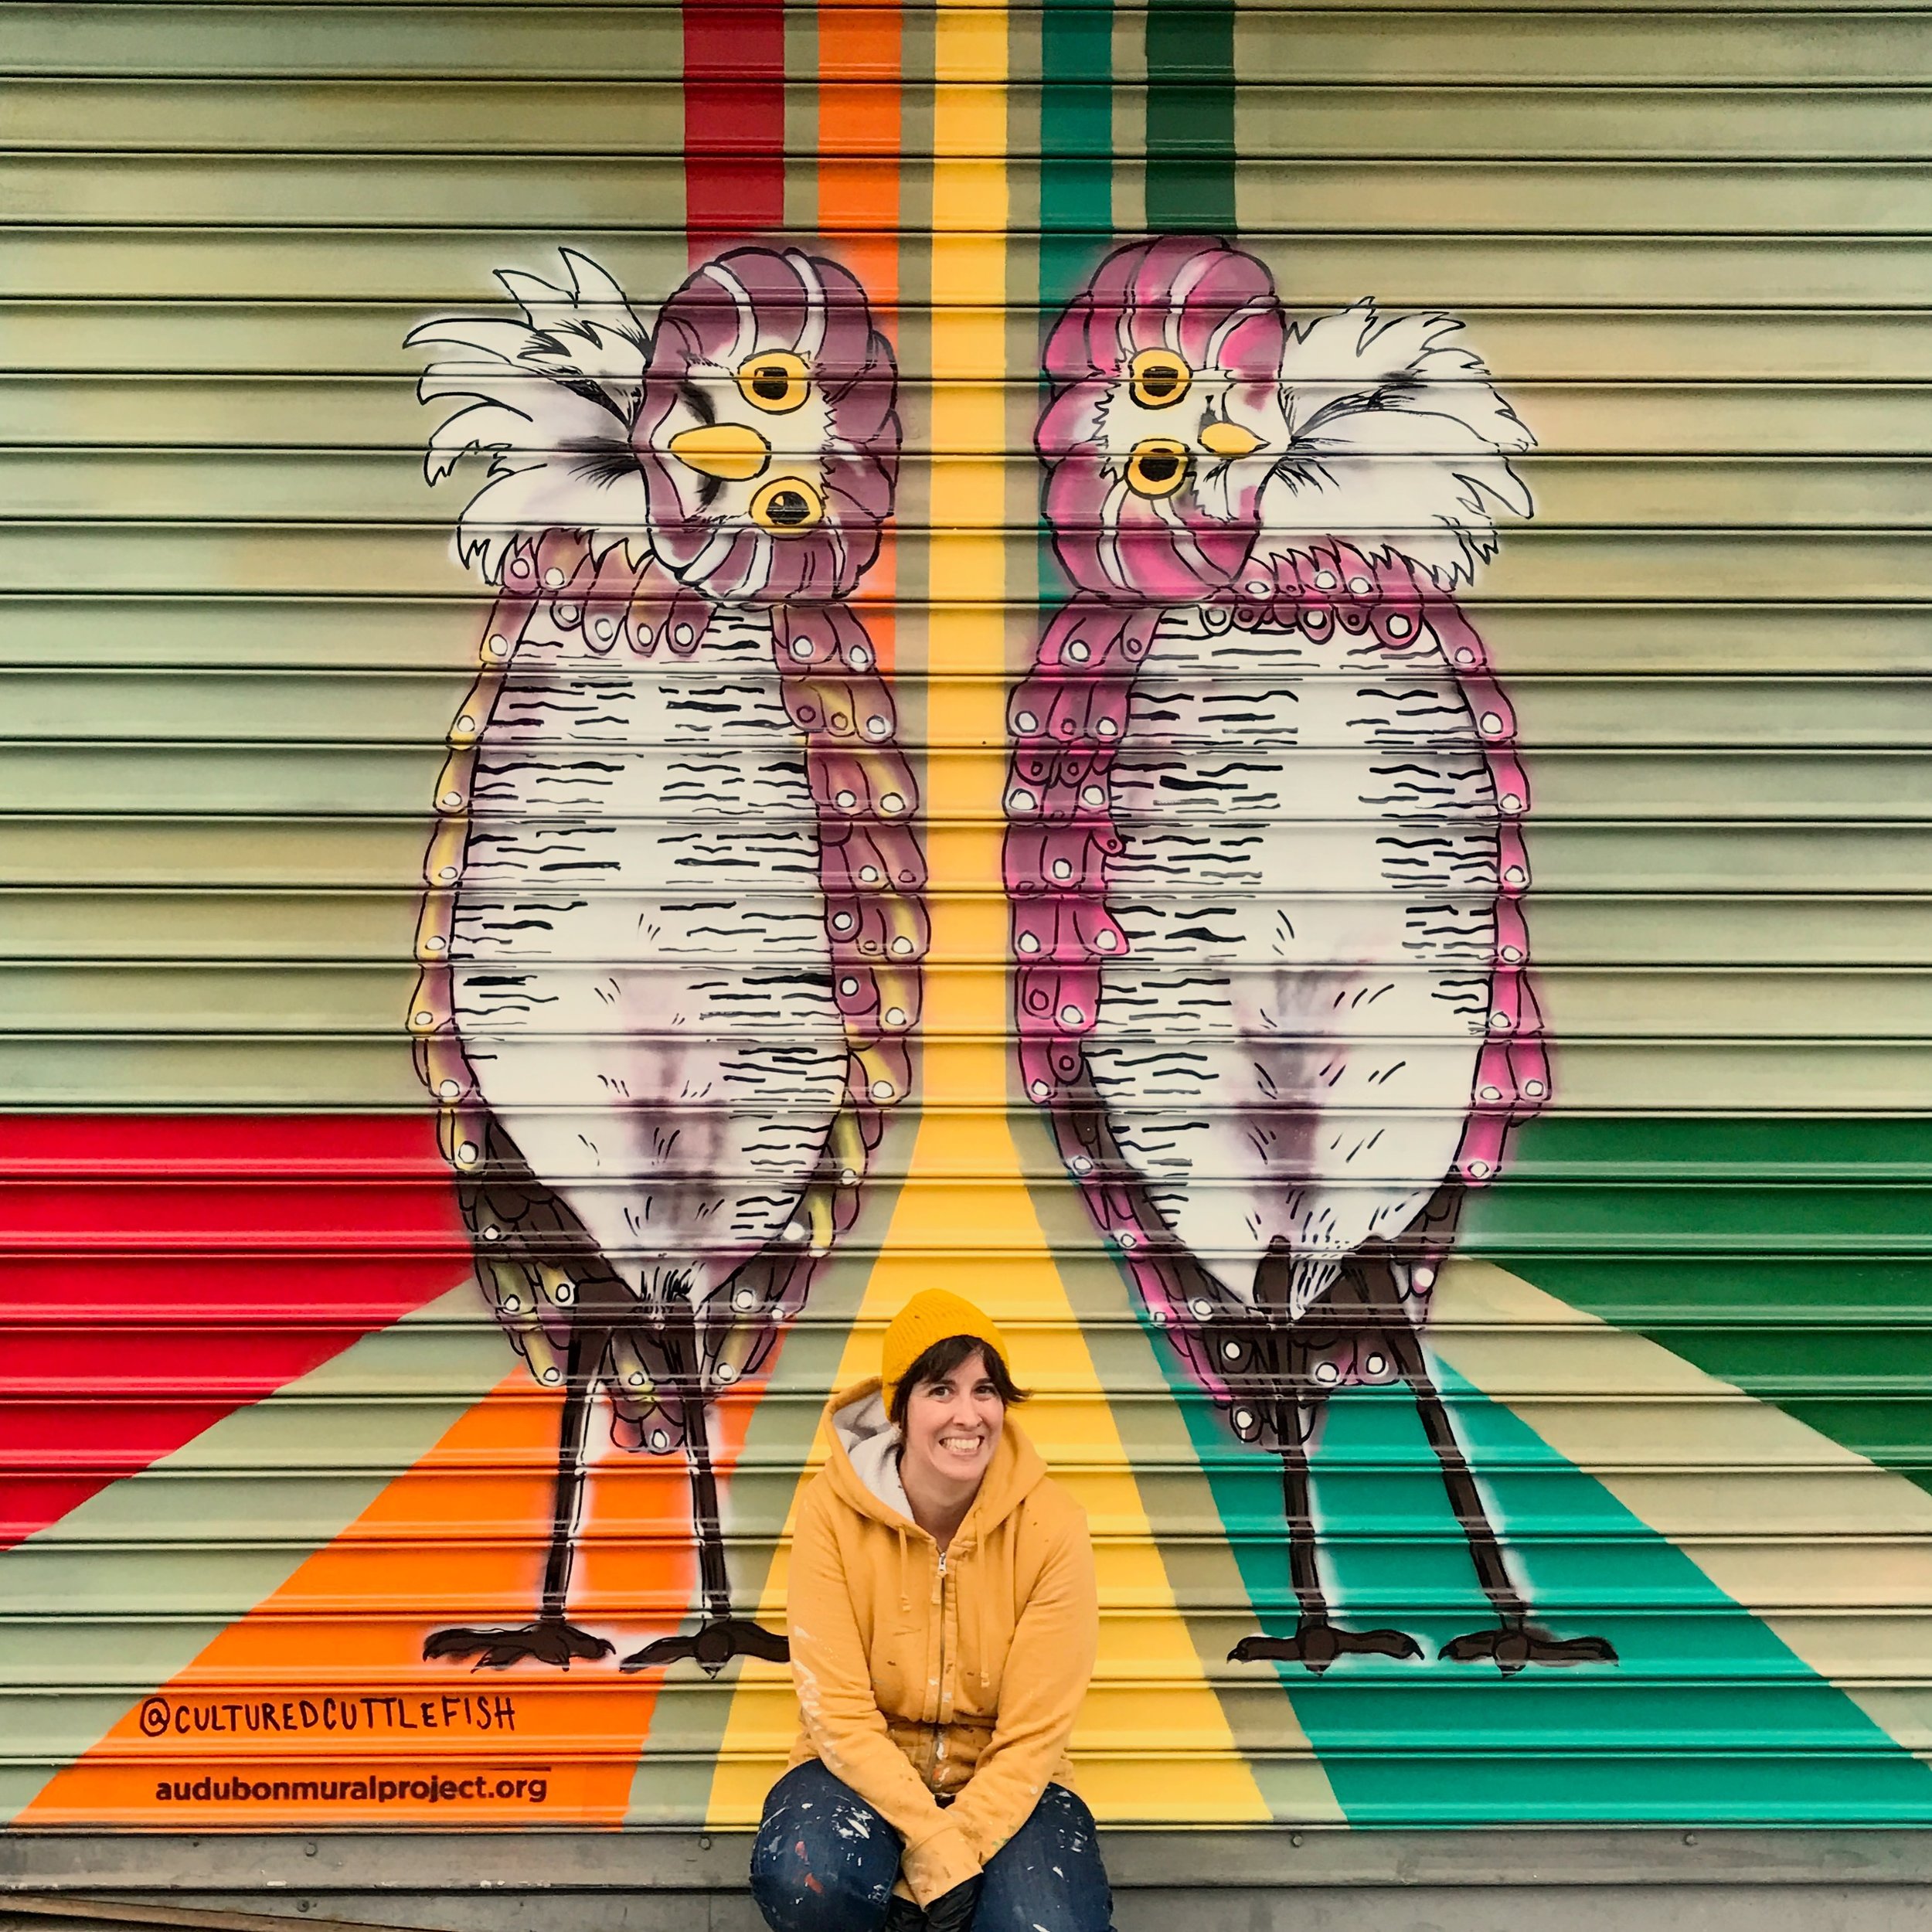  Burrowing owls mural for the  Audubon Mural Project &nbsp;on 145th and Broadway in Harlem, NYC. October 2016. 